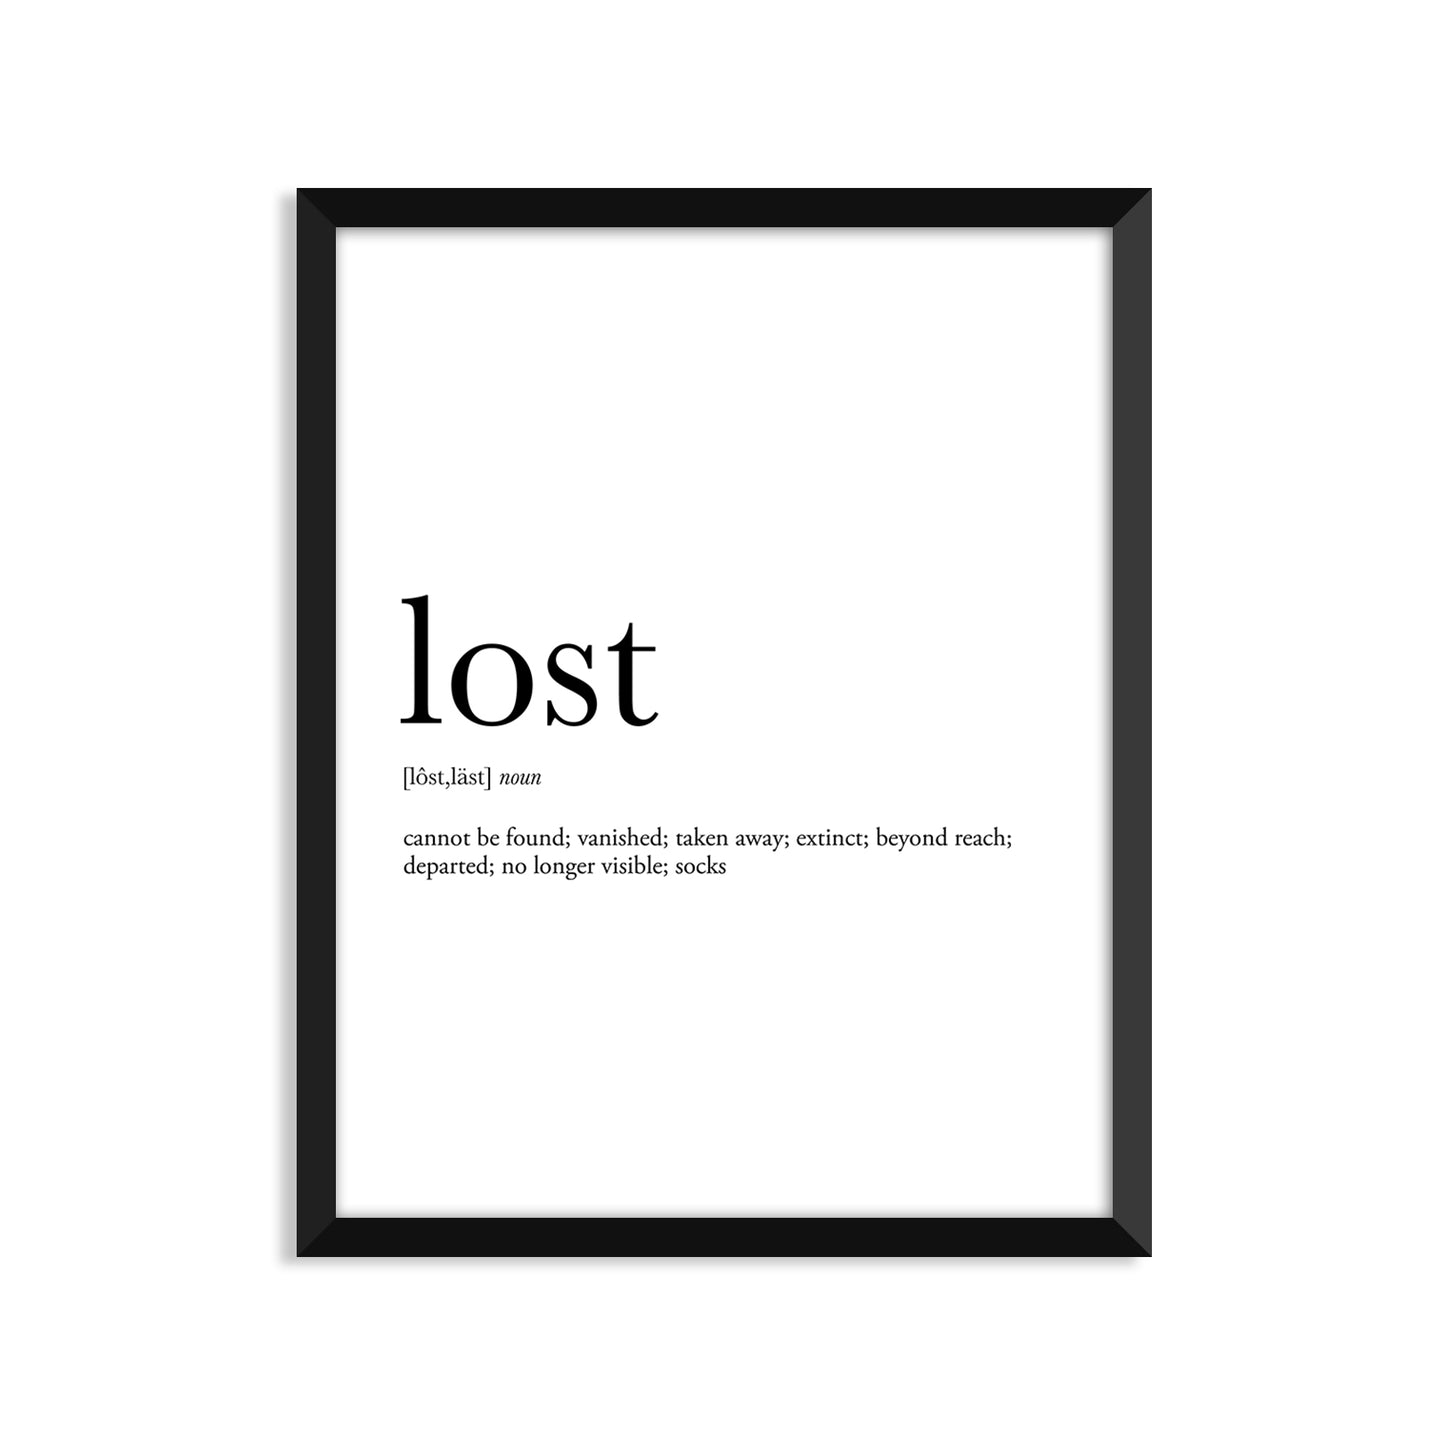 Lost Definition - Unframed Art Print Or Greeting Card